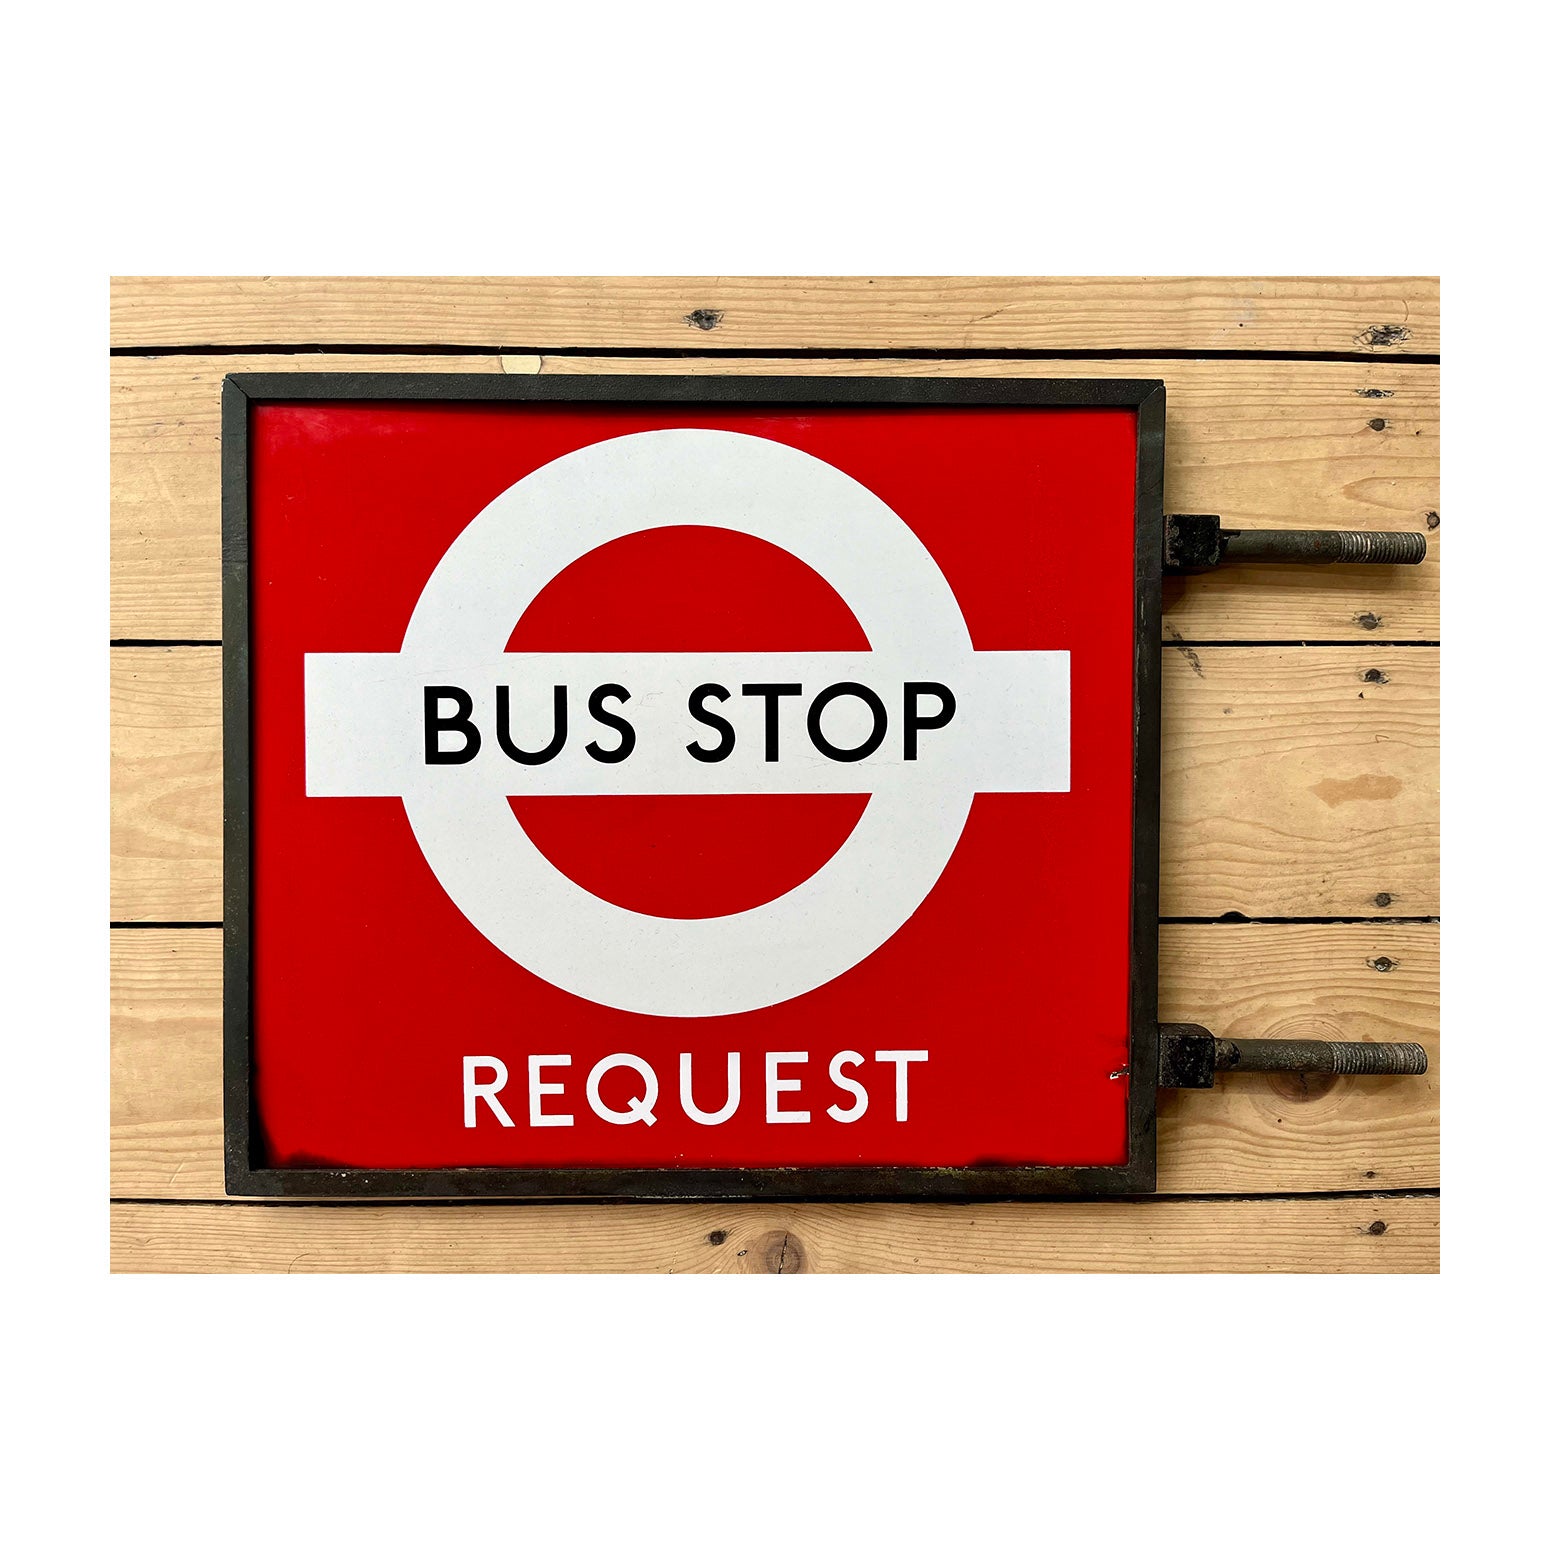  original London Transport (LT) double sided, bronze framed, enamel ‘Request’ bus stop flag, c. 1950. This red ‘Request’ version of the iconic blue/white LT bus flag was designed by Hans Schleger in the mid-1930s